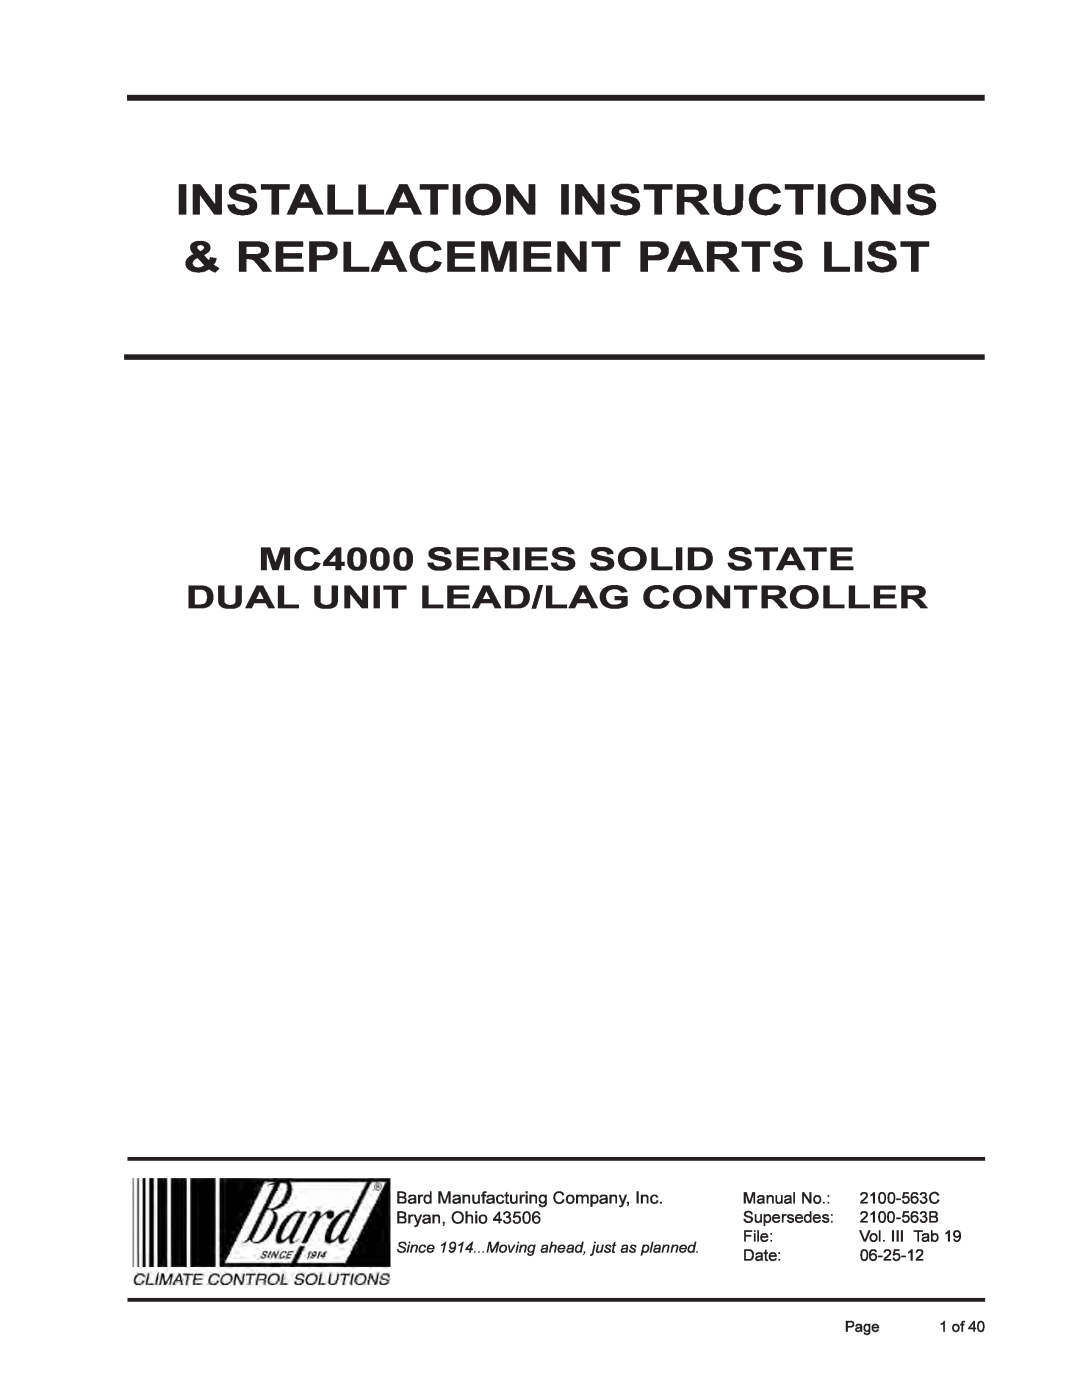 Bard installation instructions MC4000 SERIES SOLID STATE, Dual Unit Lead/Lag Controller, Bryan, Ohio, Page, 1 of 